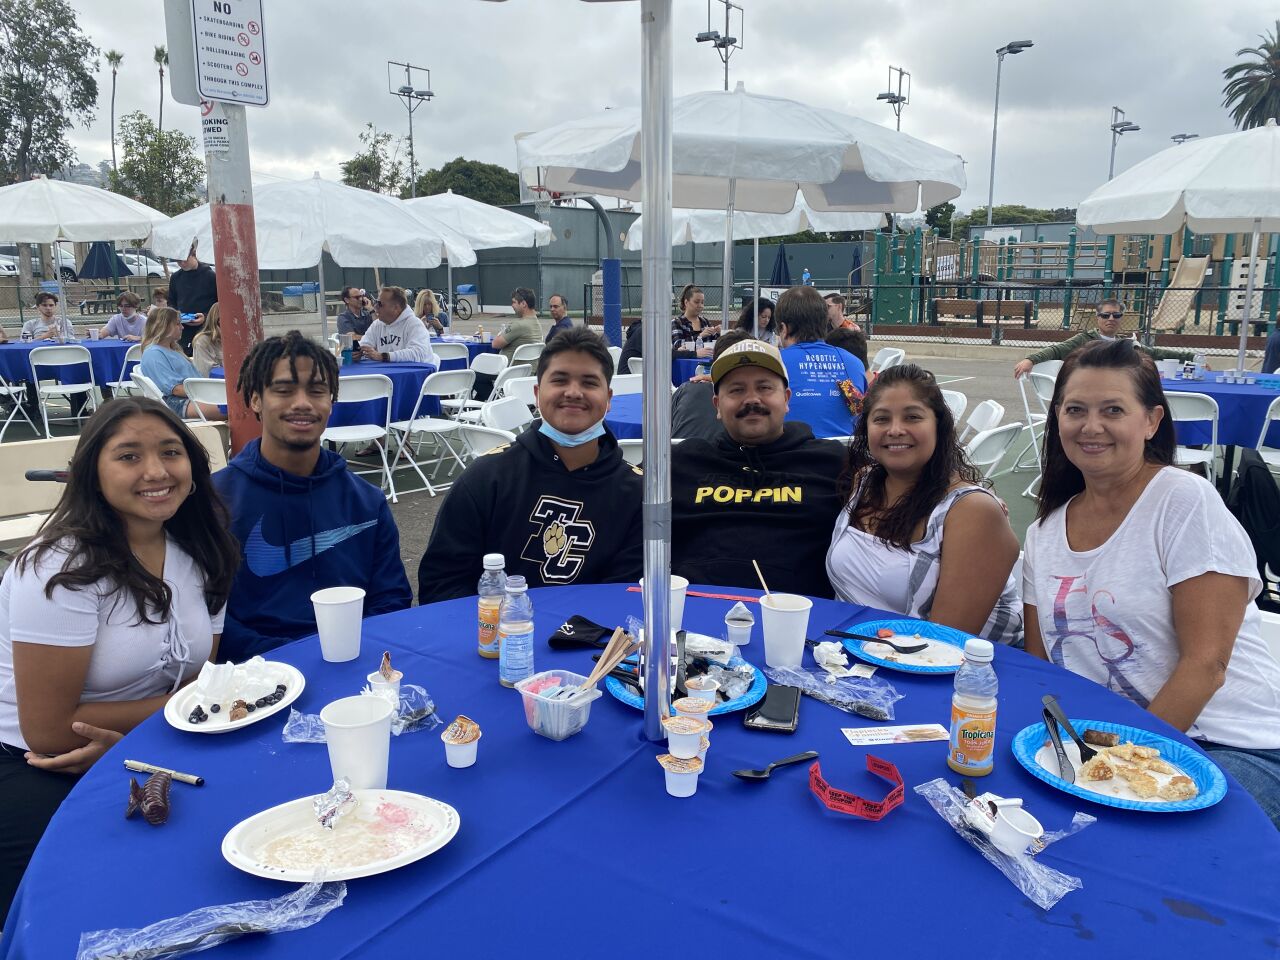 These folks were among nearly 500 people who attended the Kiwanis Club of La Jolla's pancake breakfast Sept. 18.